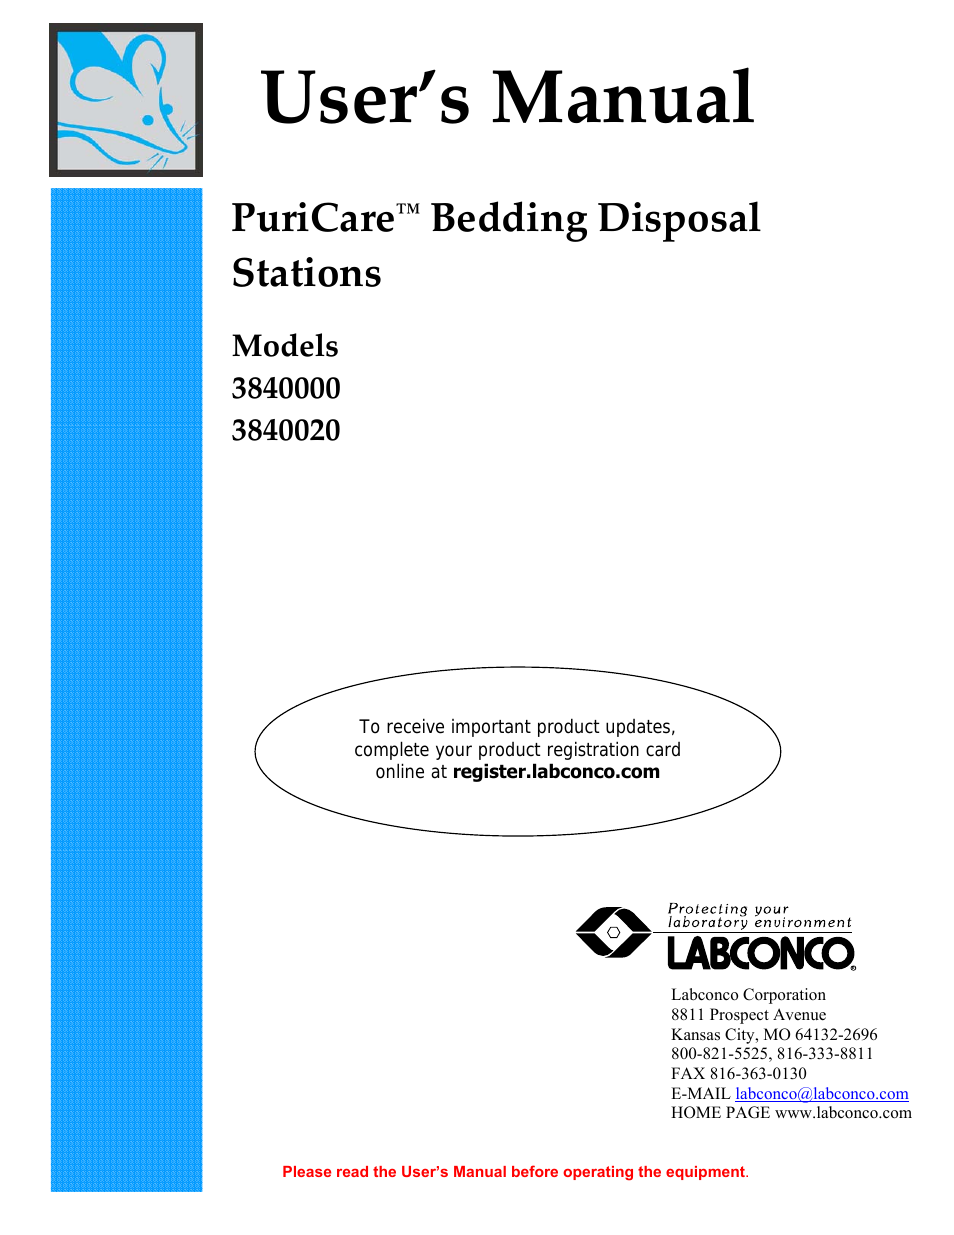 PuriCare Bedding Disposal Stations 3840020